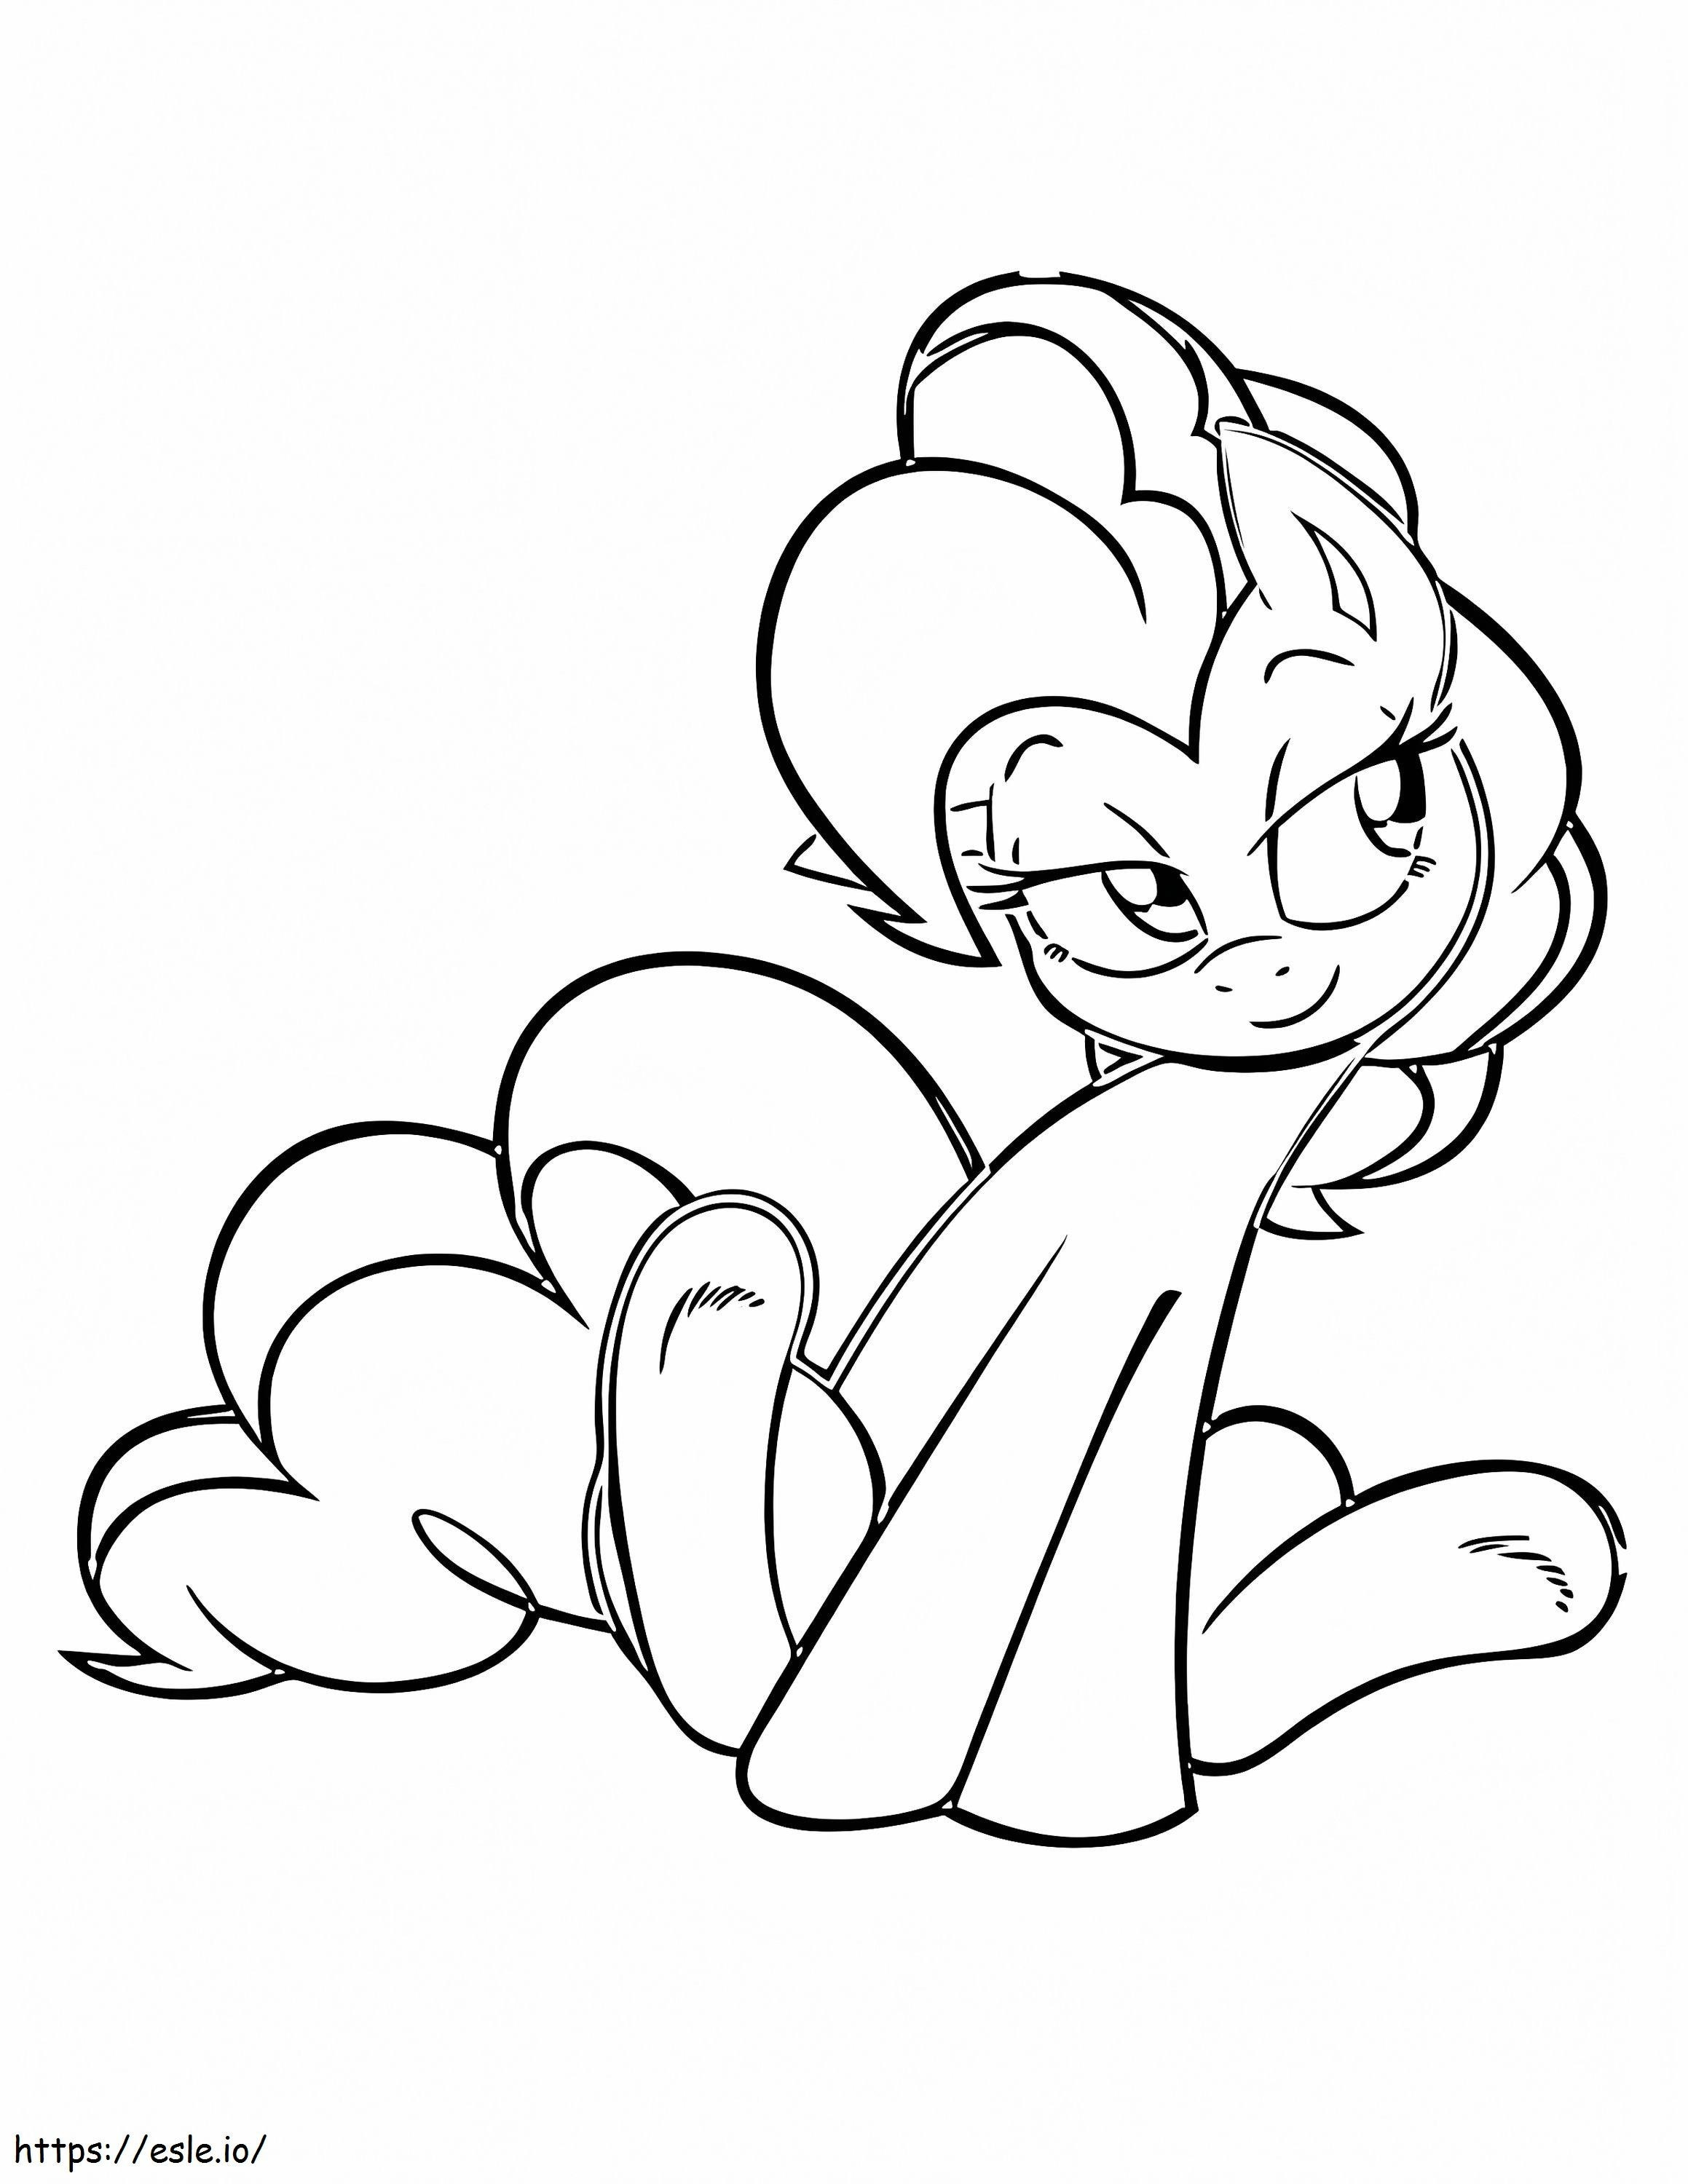 My Little Pony Pinkie Pie coloring page